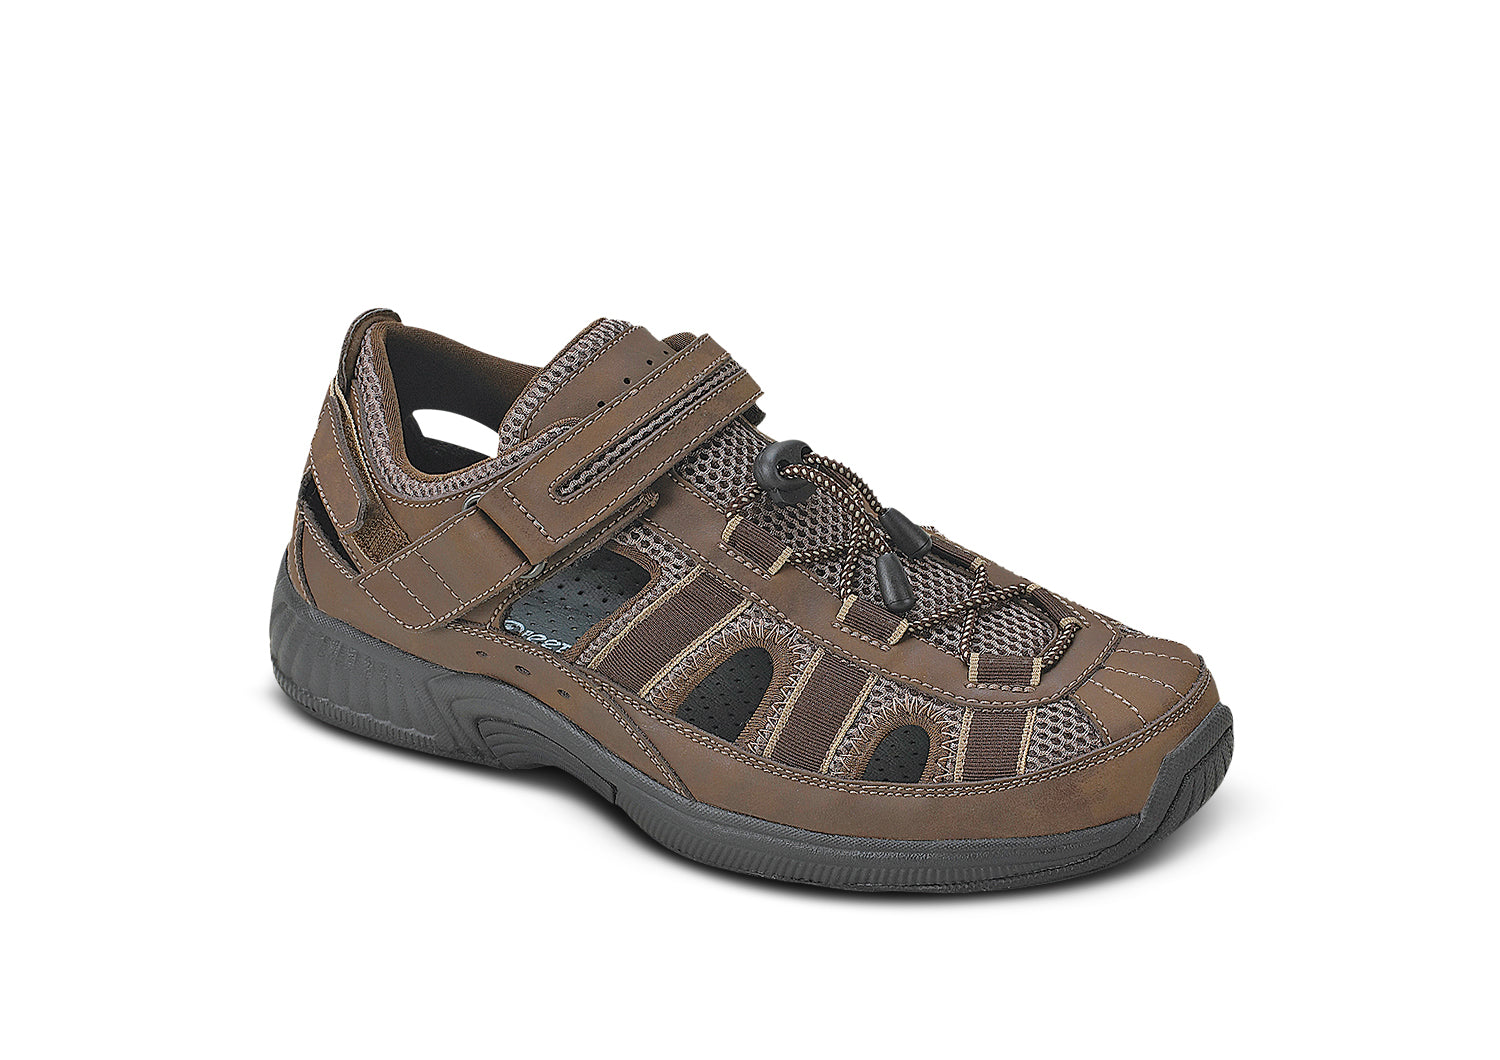 Men's criss-cross slide sandals with arch support. Colour: brown. Size: 8